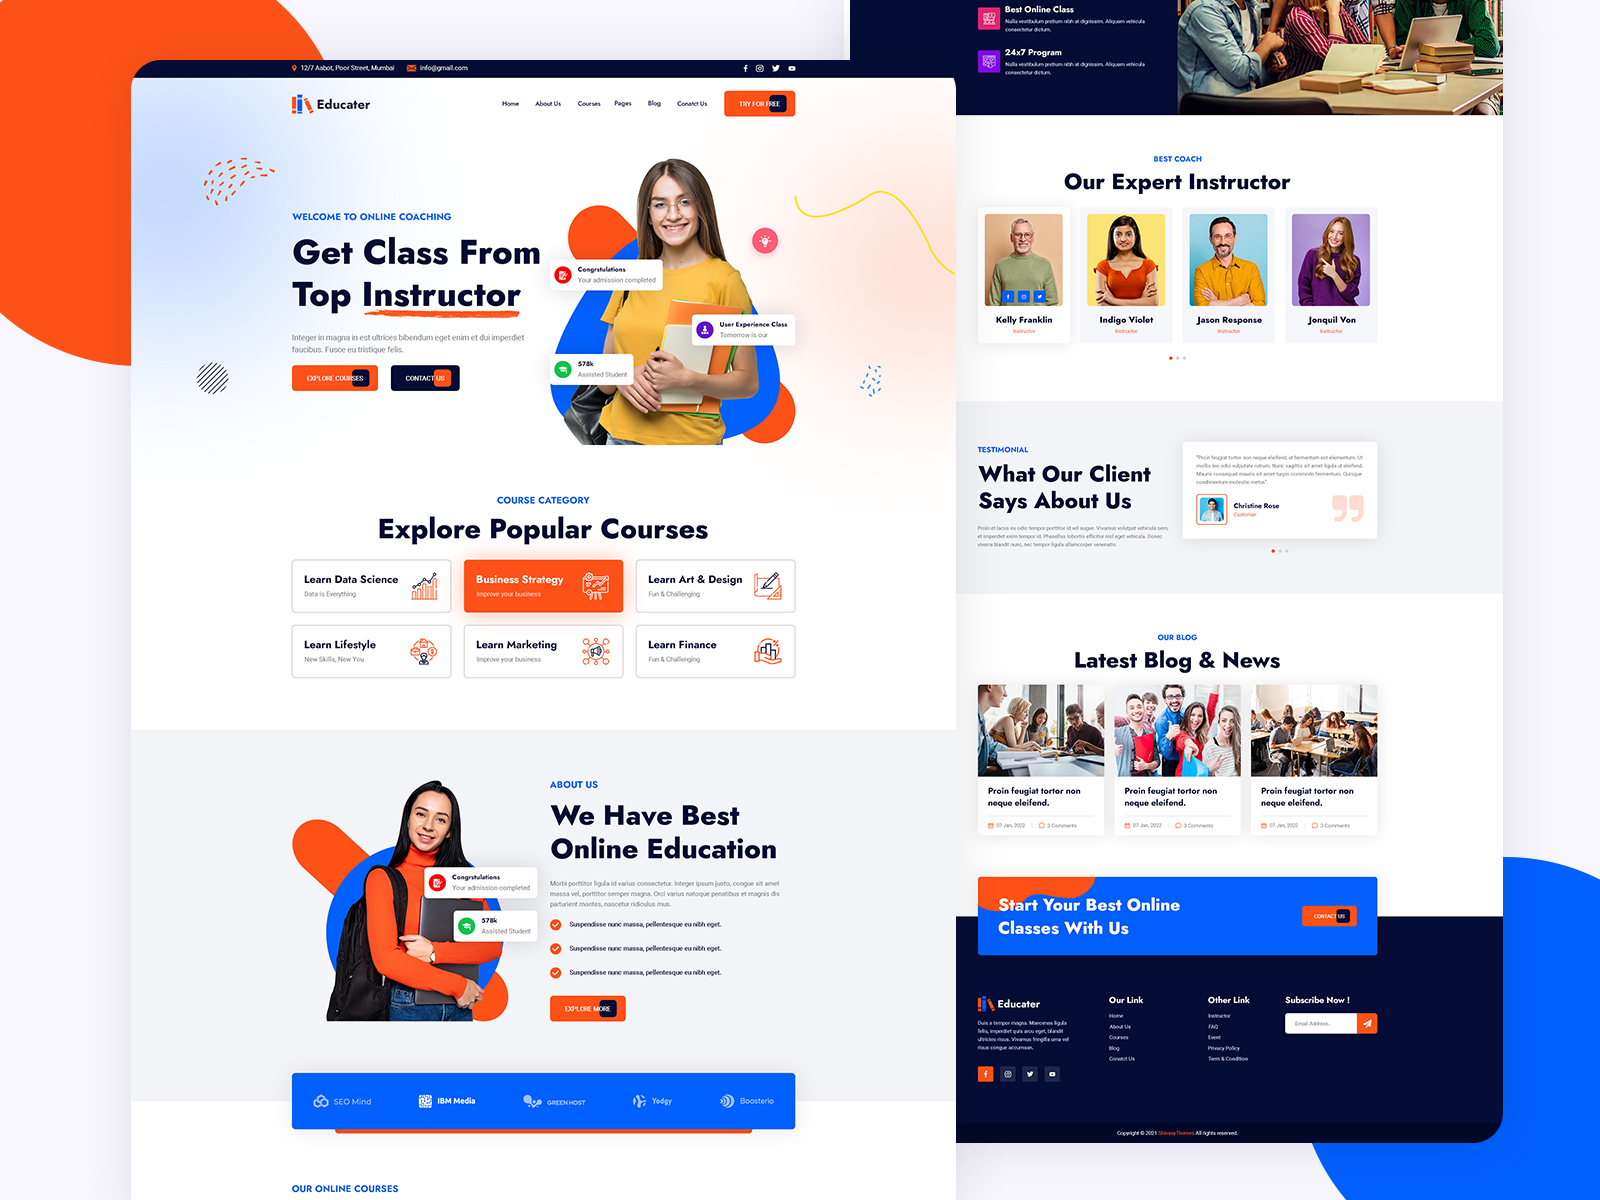 educater-online-courses-education-html-psd-xd-template-by-shivaay